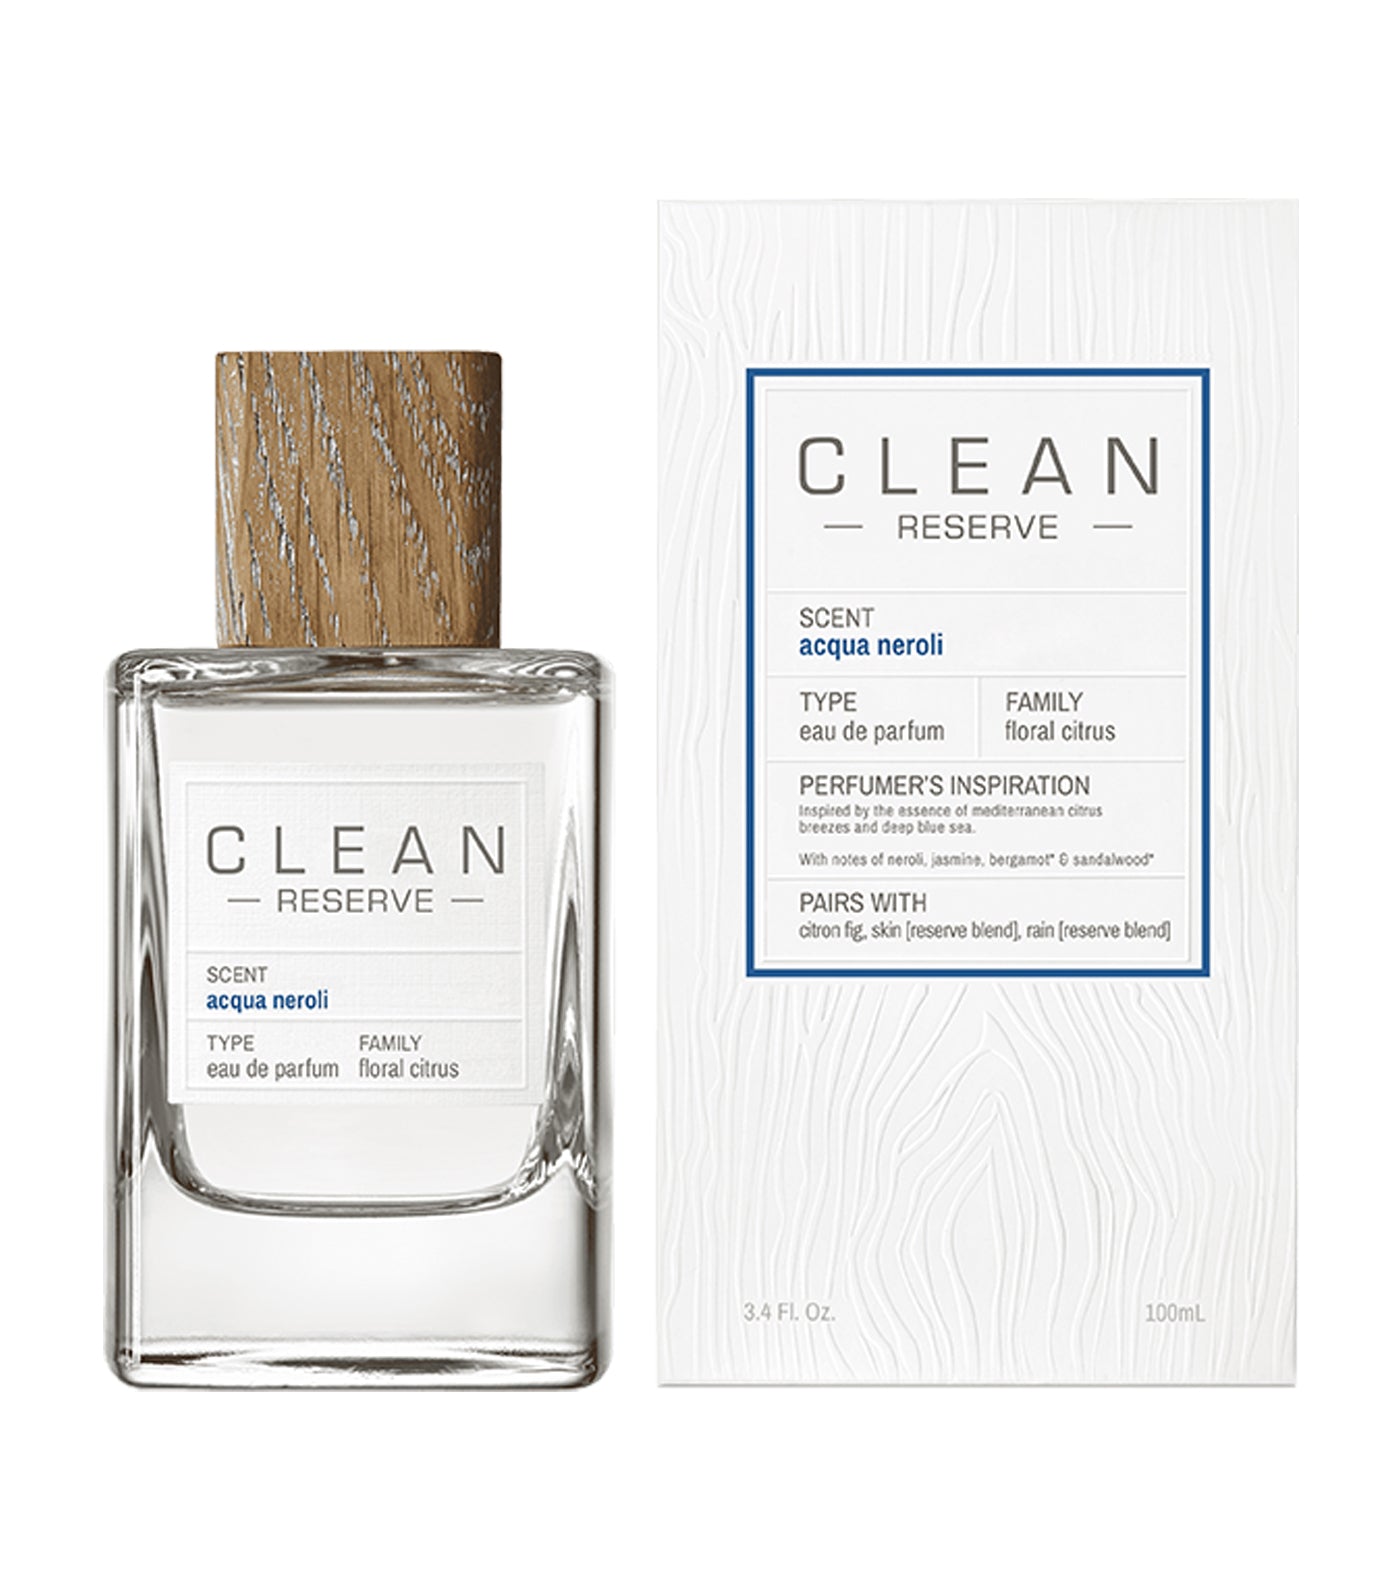 CLEAN RESERVE Acqua Neroli by CLEAN Beauty Collective